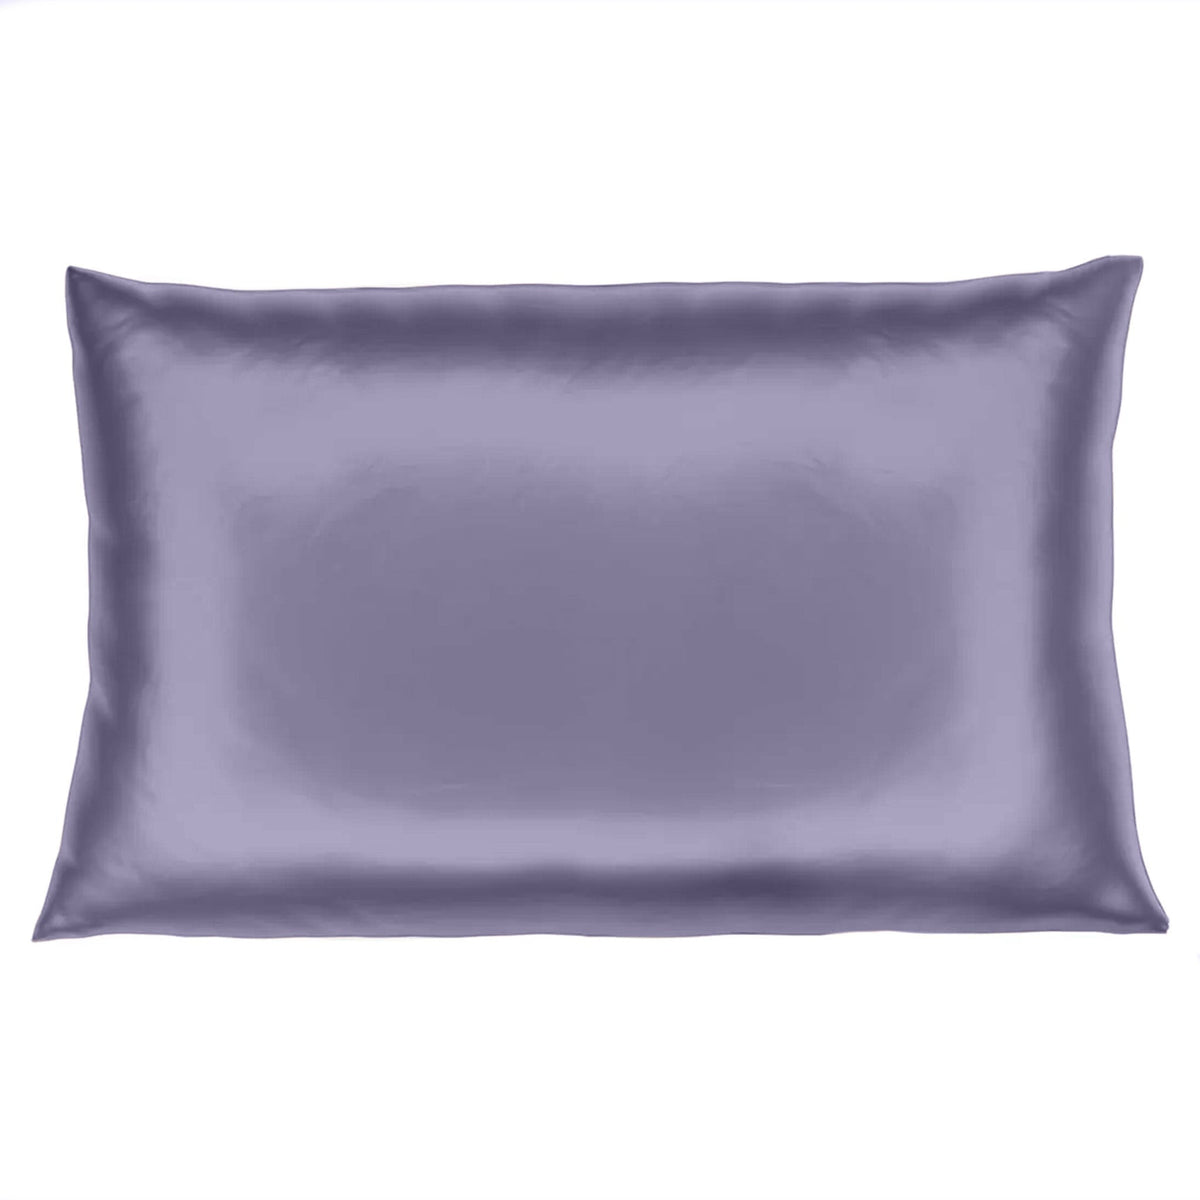 Mulberry Park Silks Deluxe 19 Momme Pure Silk Pillowcase in Lilac Color